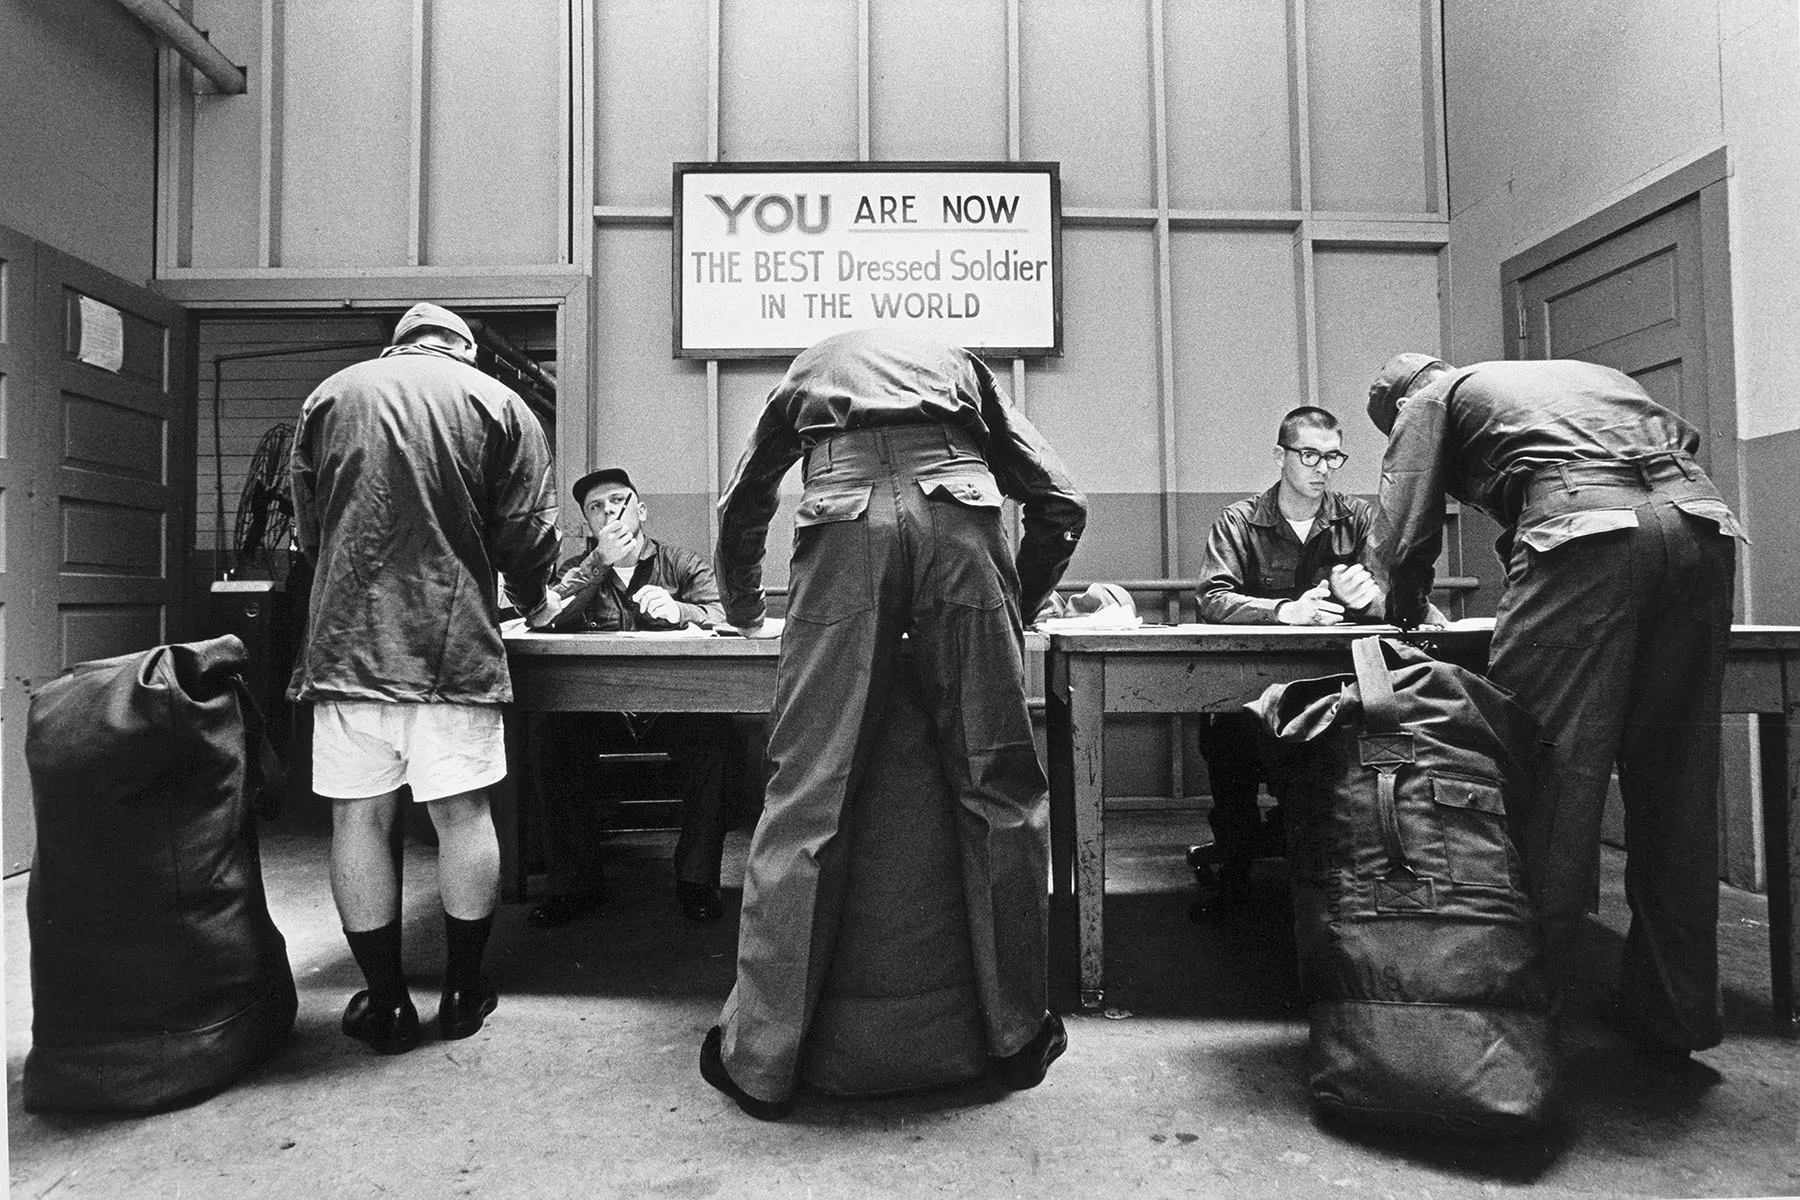 Three recently drafted soldiers sign papers under a sign that reads "You are now the best dressed soldier in the world."